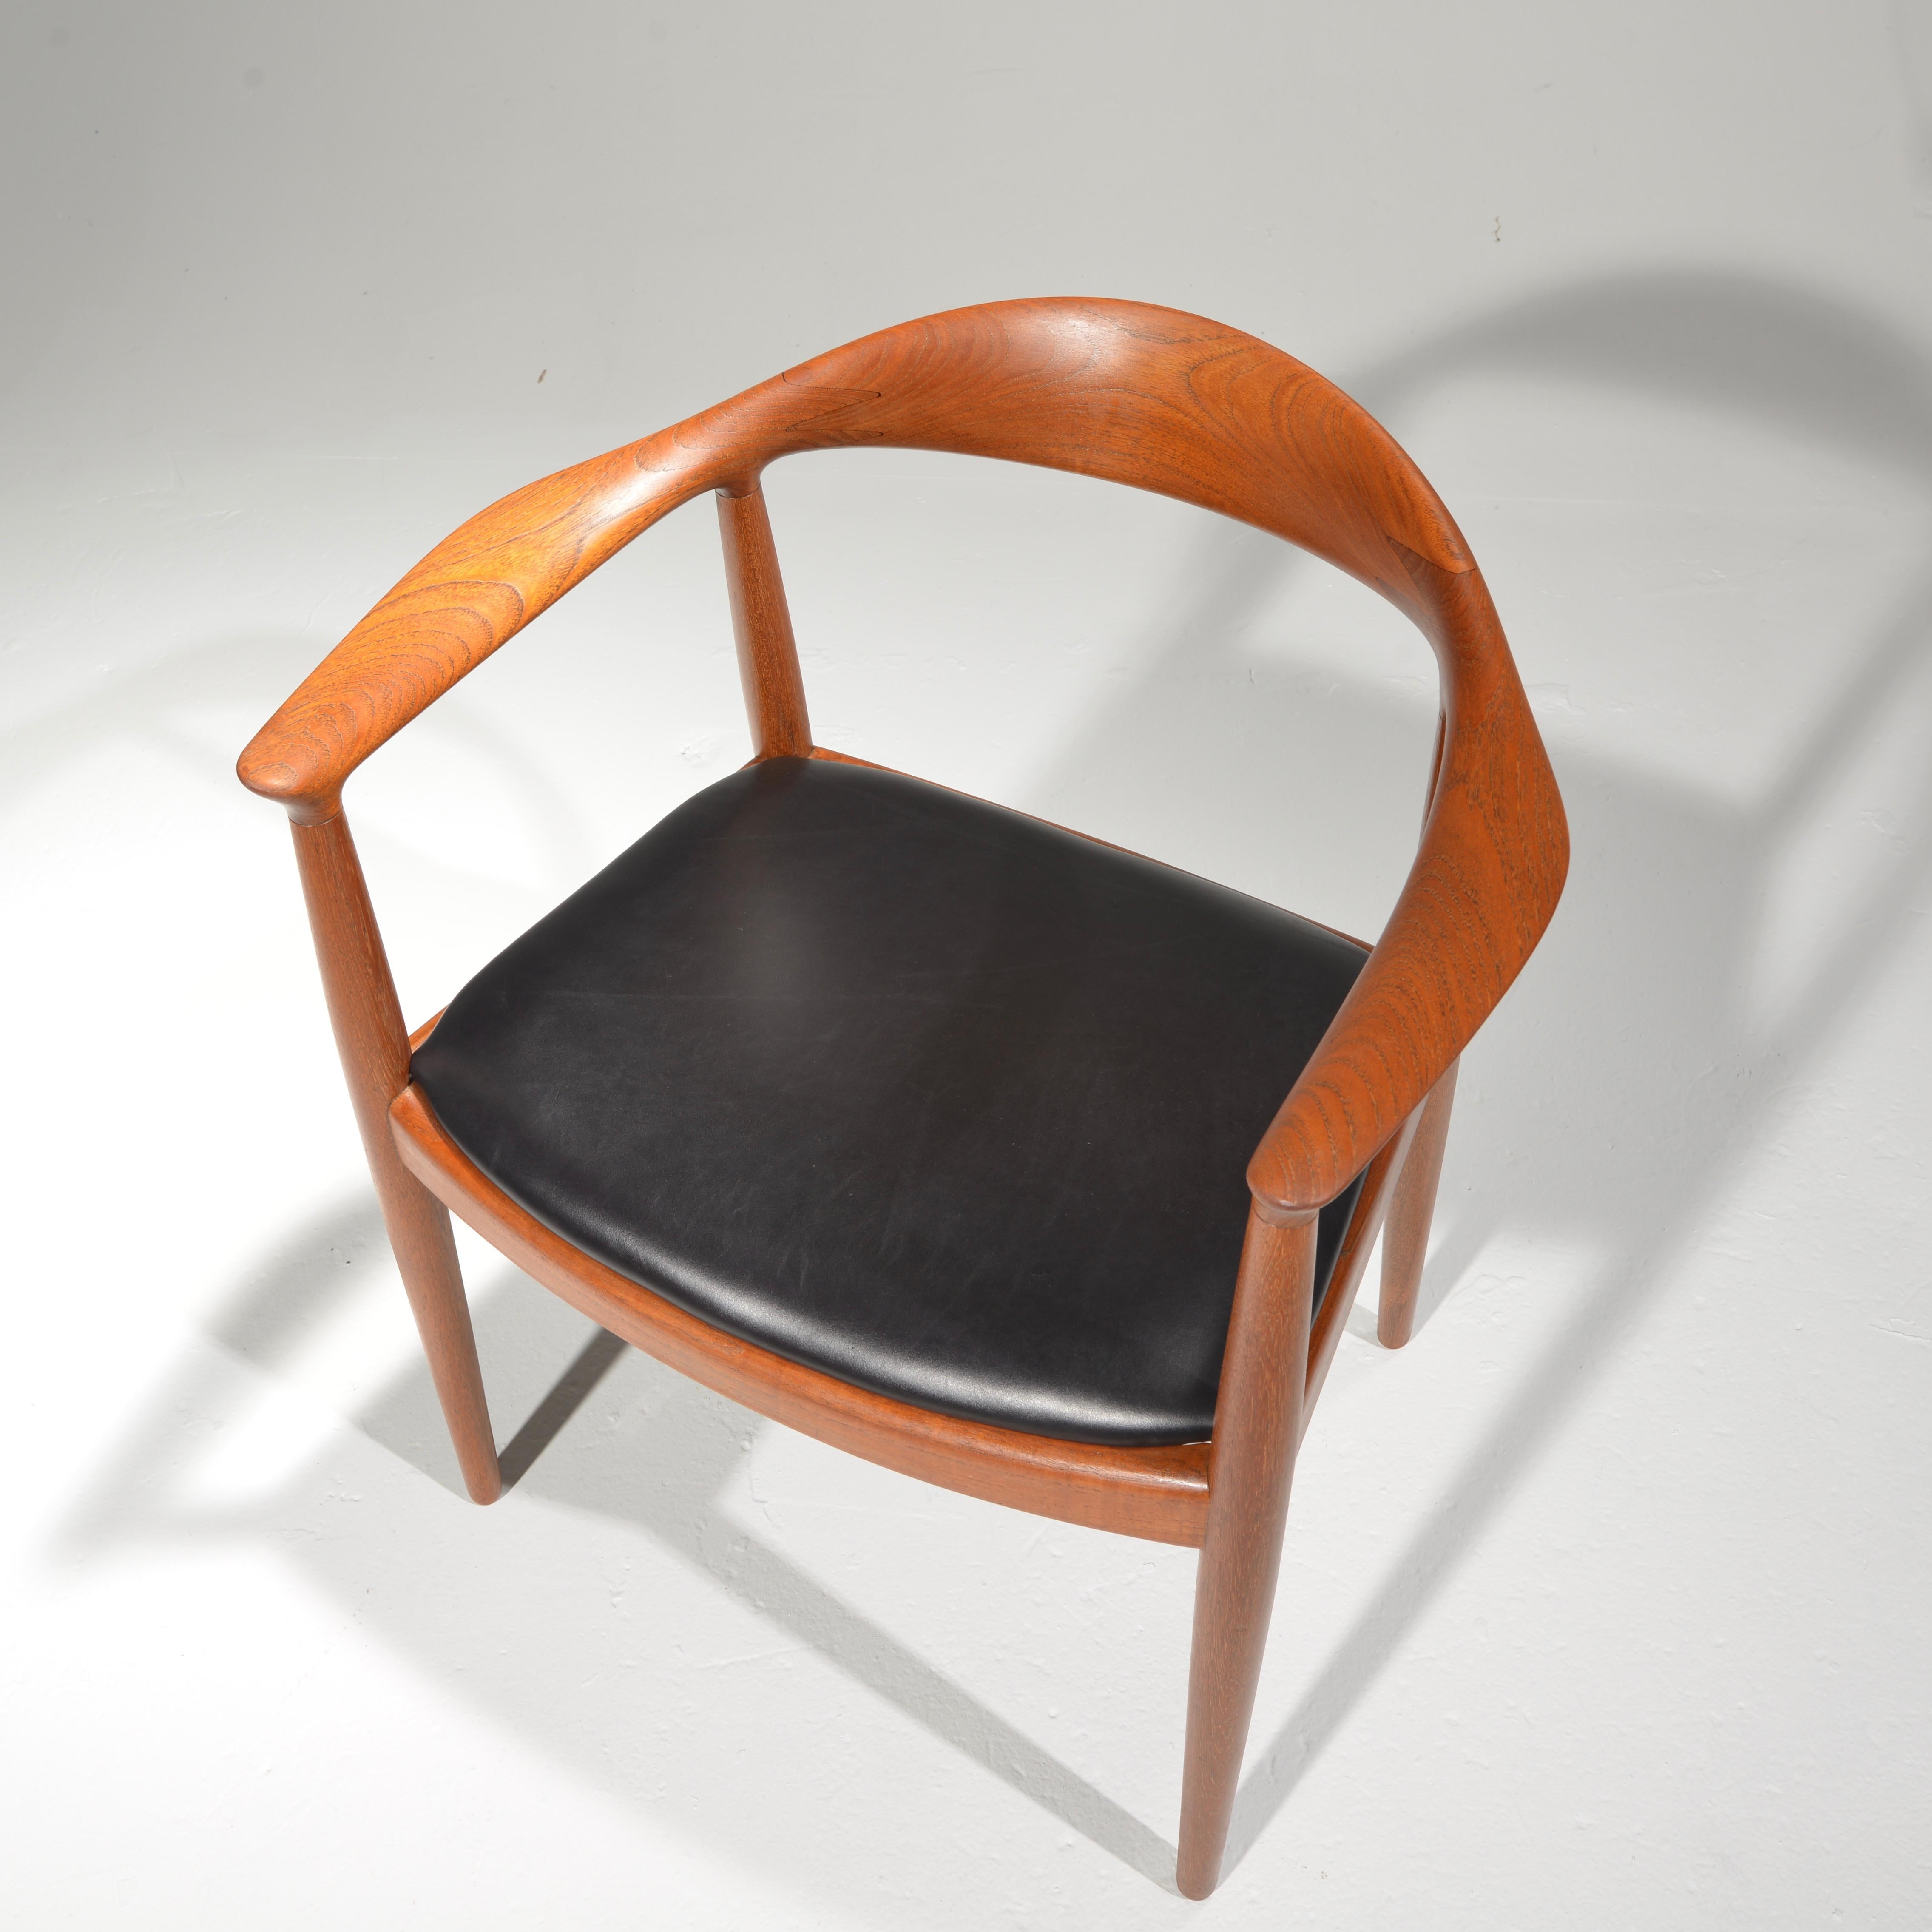 4 Early Hans Wegner for Johannes Hansen JH-503 Chairs in Teak In Good Condition For Sale In Los Angeles, CA